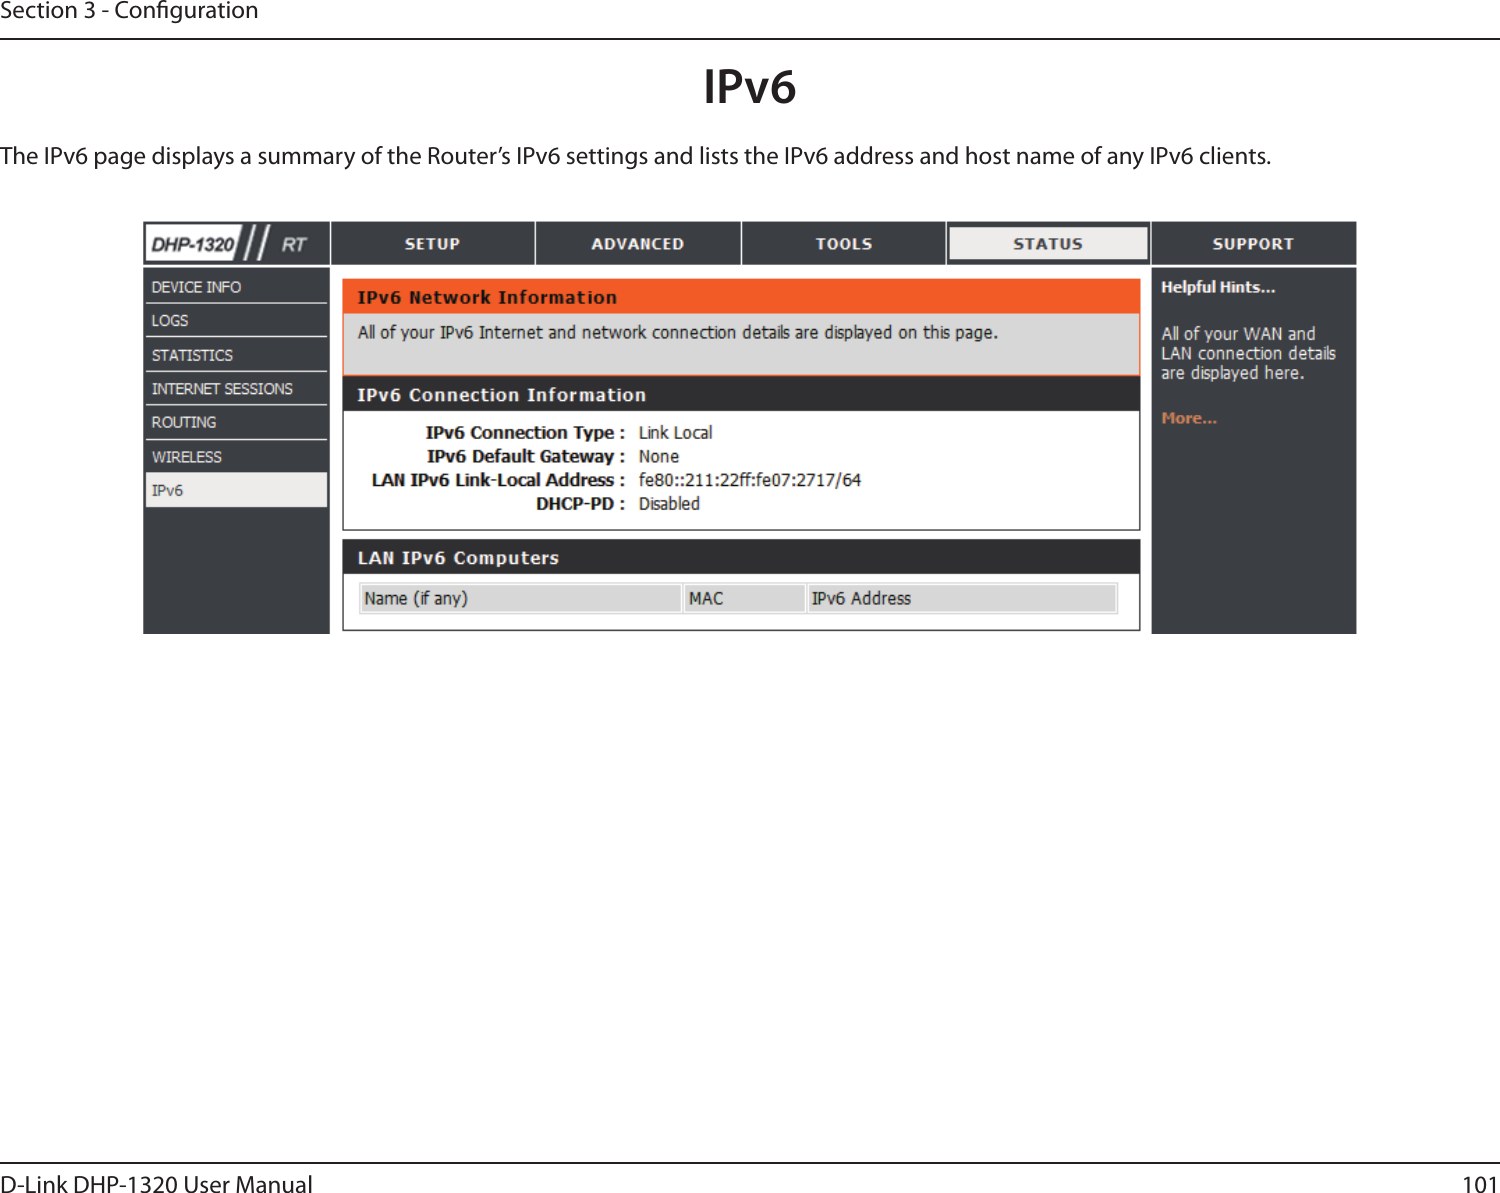 101D-Link DHP-1320 User ManualSection 3 - CongurationIPv6The IPv6 page displays a summary of the Router’s IPv6 settings and lists the IPv6 address and host name of any IPv6 clients. 